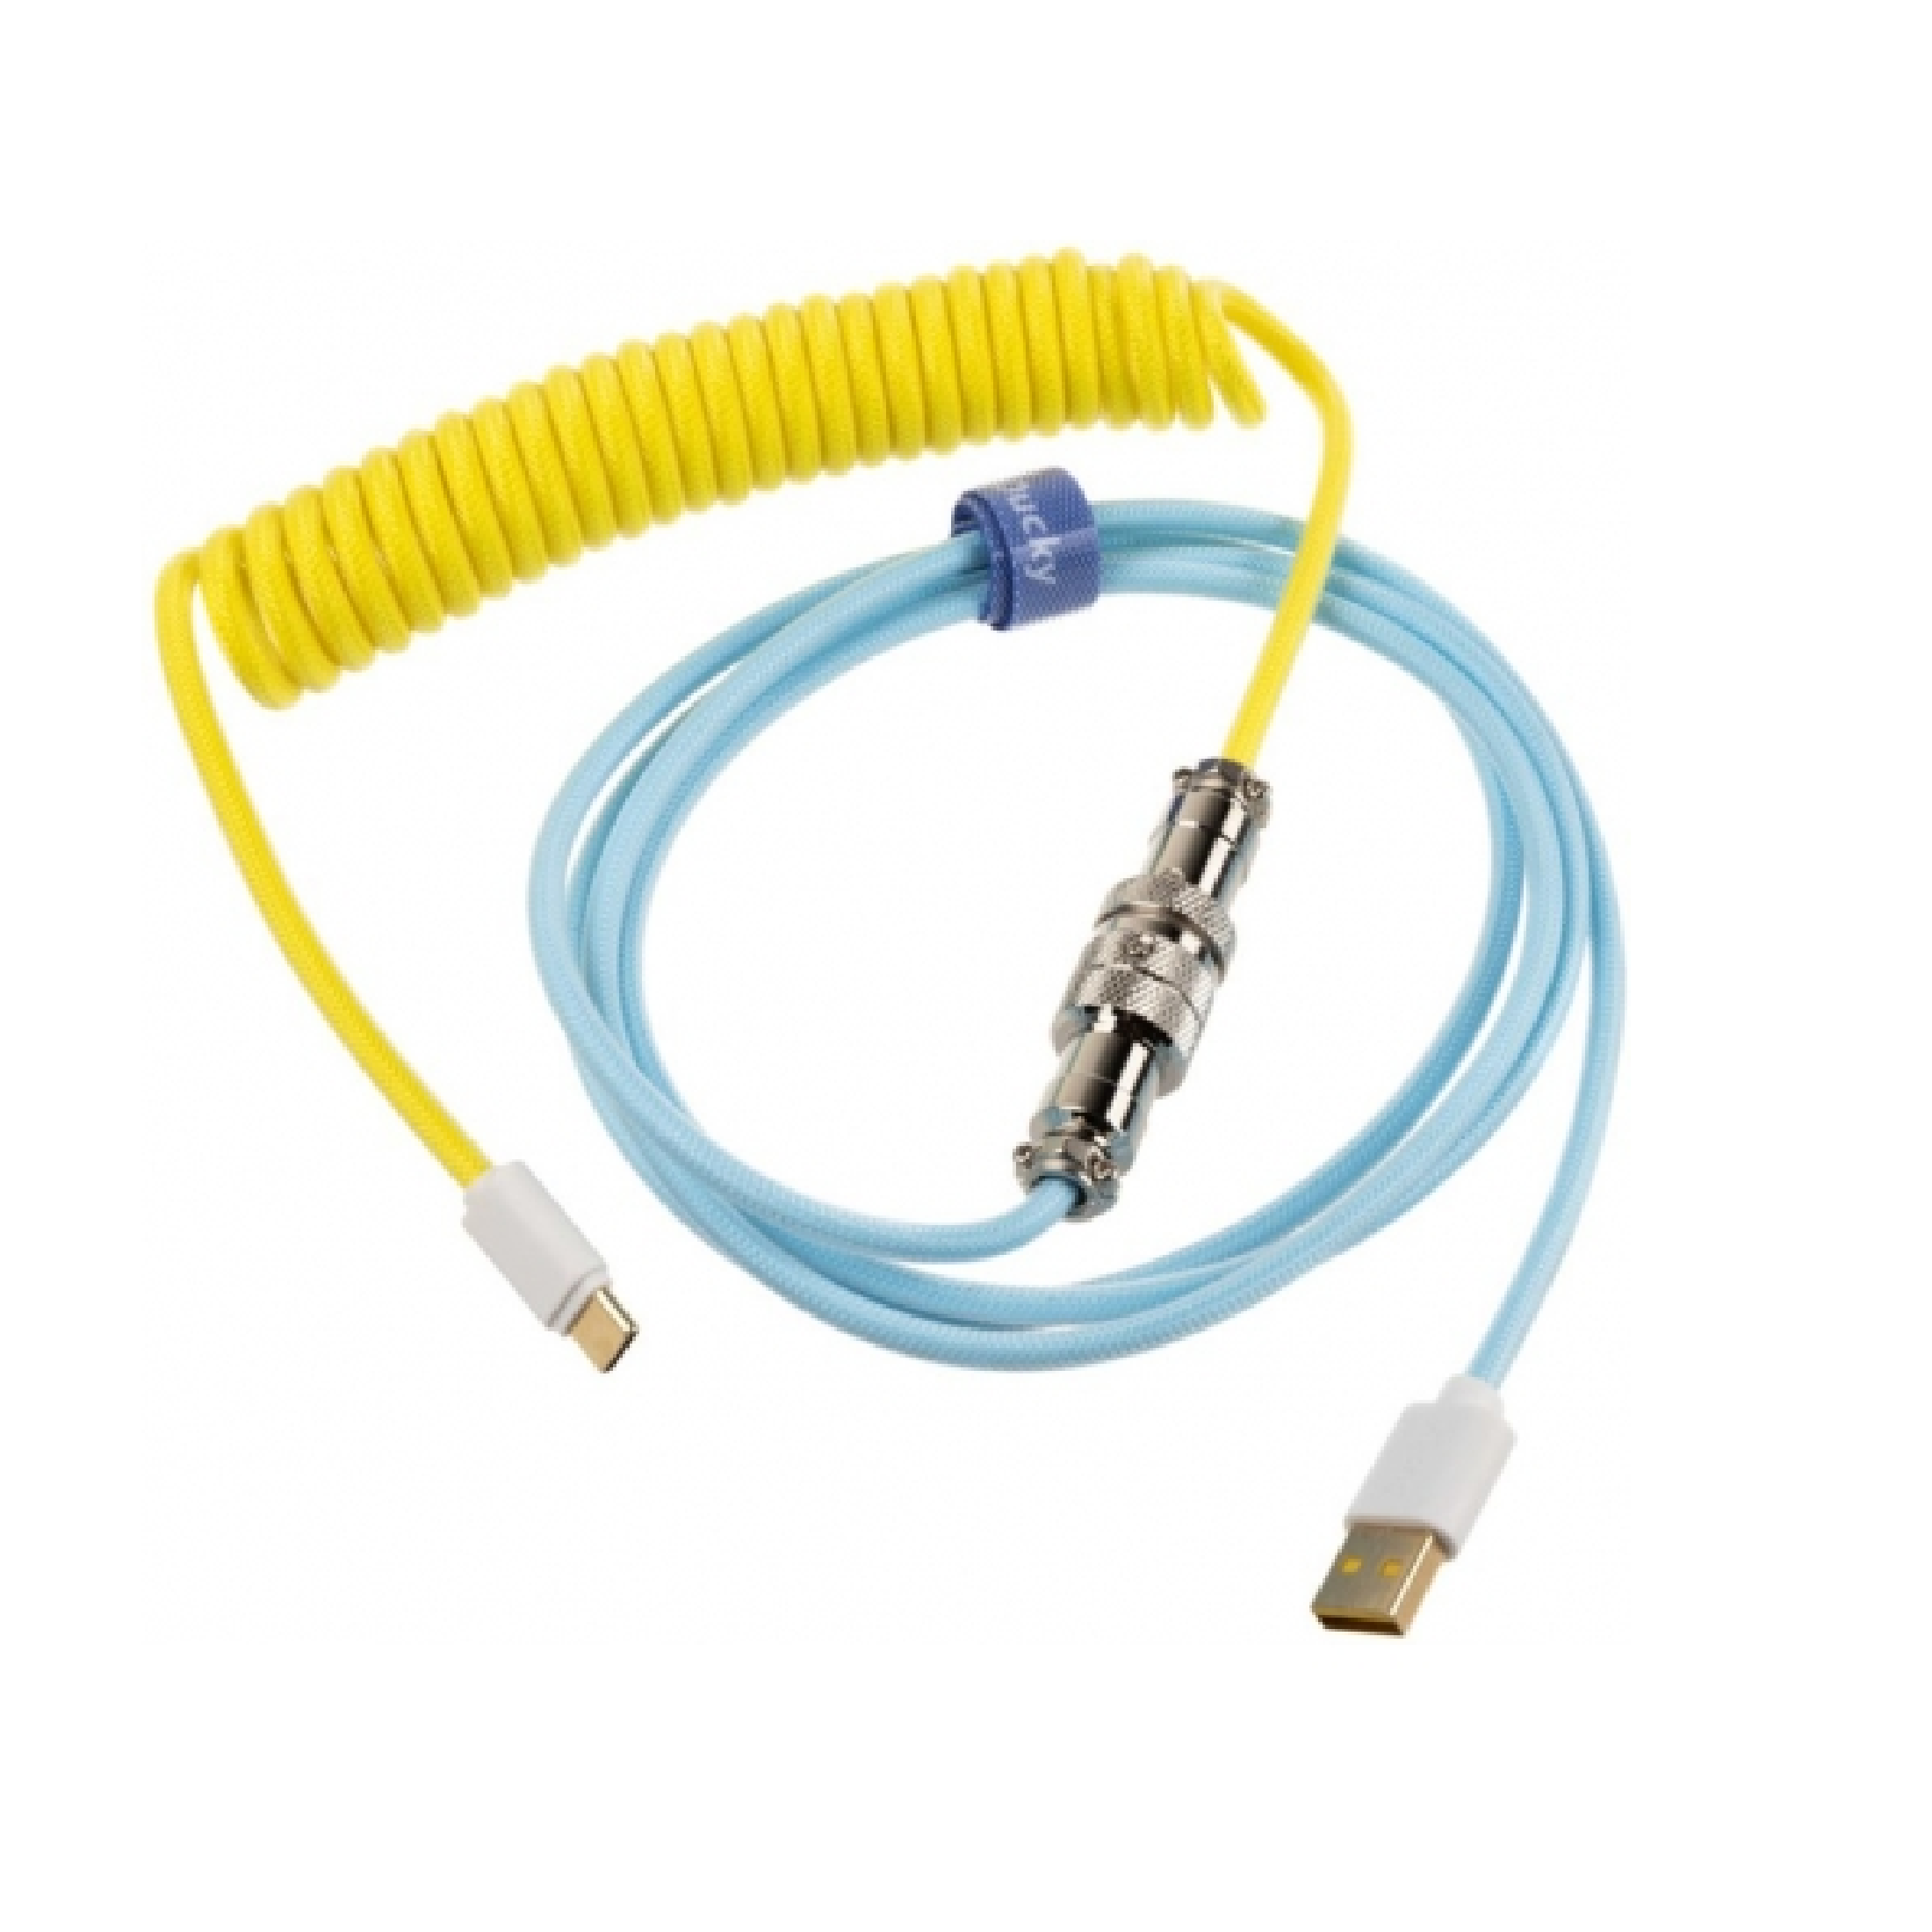 Ducky Premicord Custom Keyboard Cable - Cotton Candy Edition - Store 974 | ستور ٩٧٤